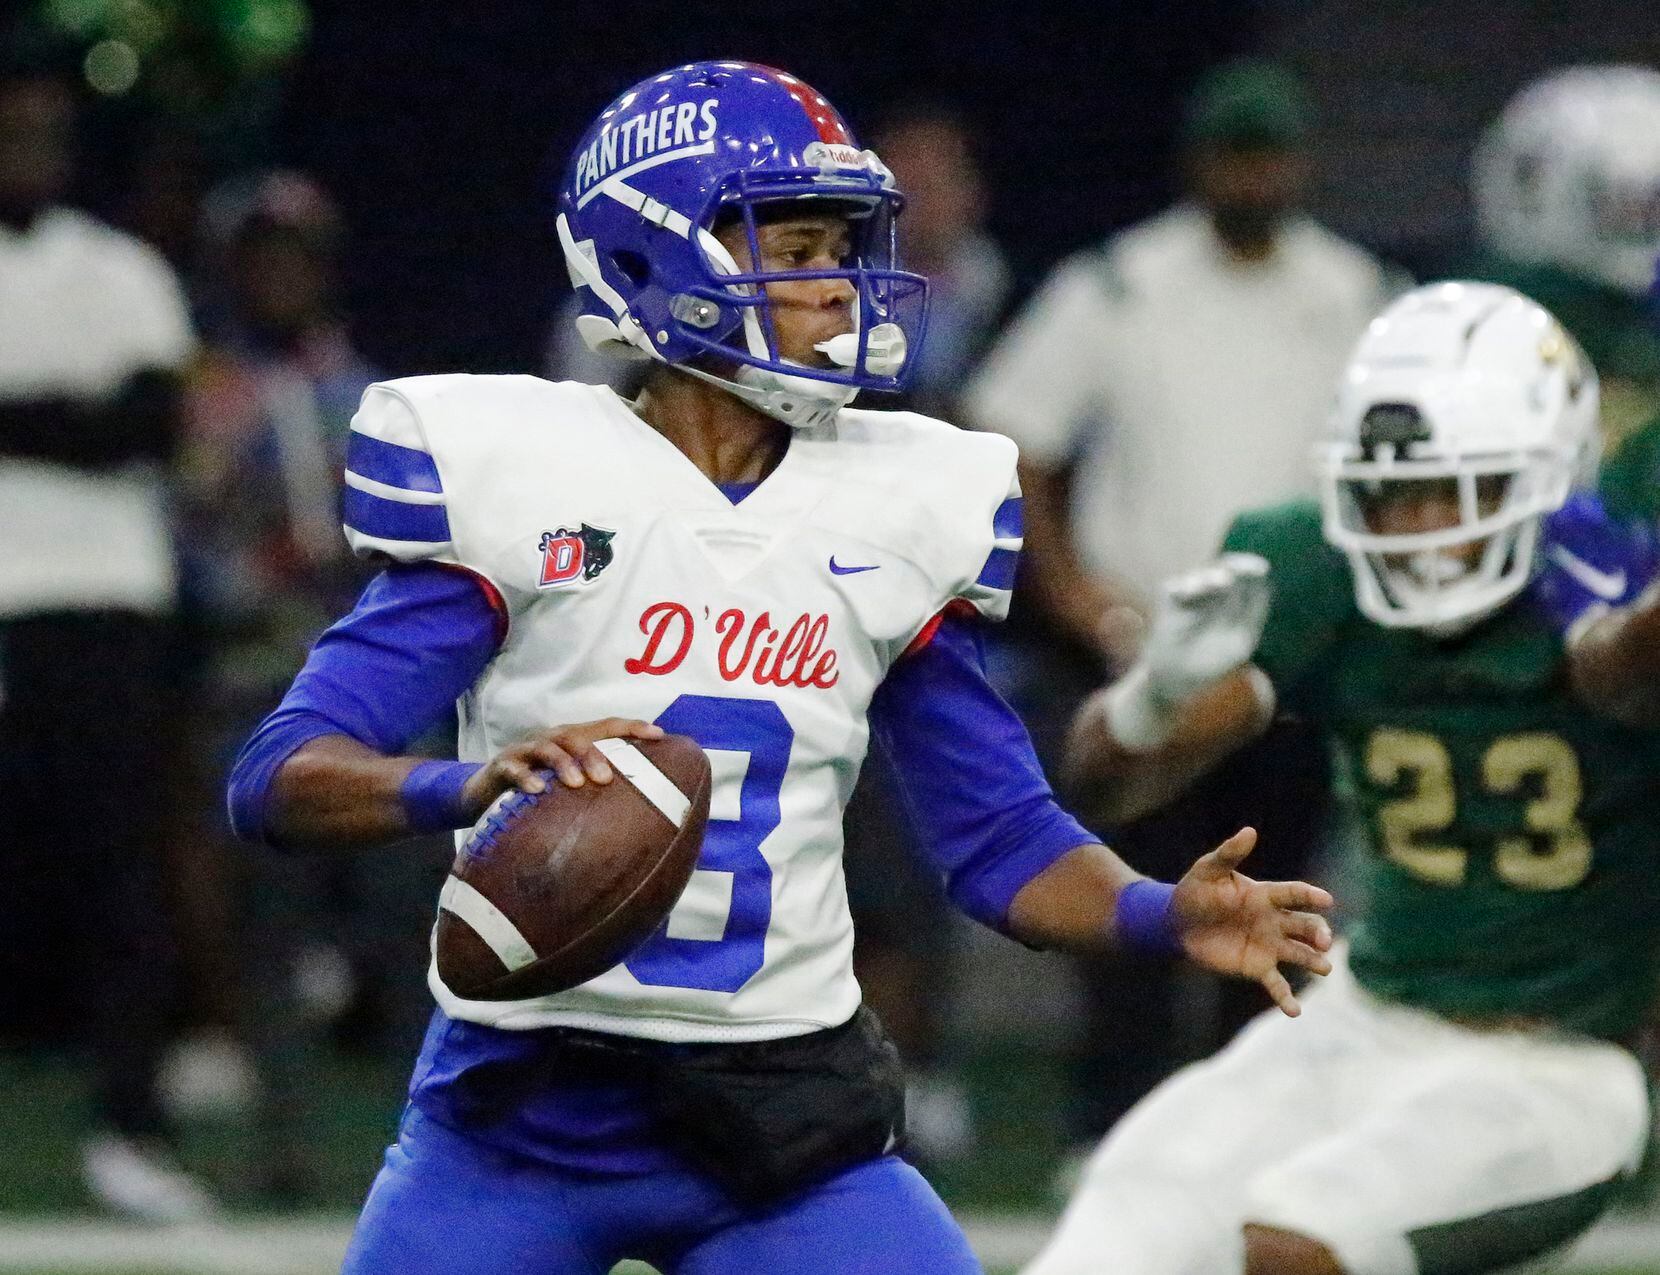 Duncanville High School quarterback Solomon James (3) makes his reads on a pass play during the first half as DeSoto High School played Duncanville High School in the Class 6A Division I Region II final playoff game at the Ford Center in Frisco on Saturday, December 4, 2021. (Stewart F. House/Special Contributor)